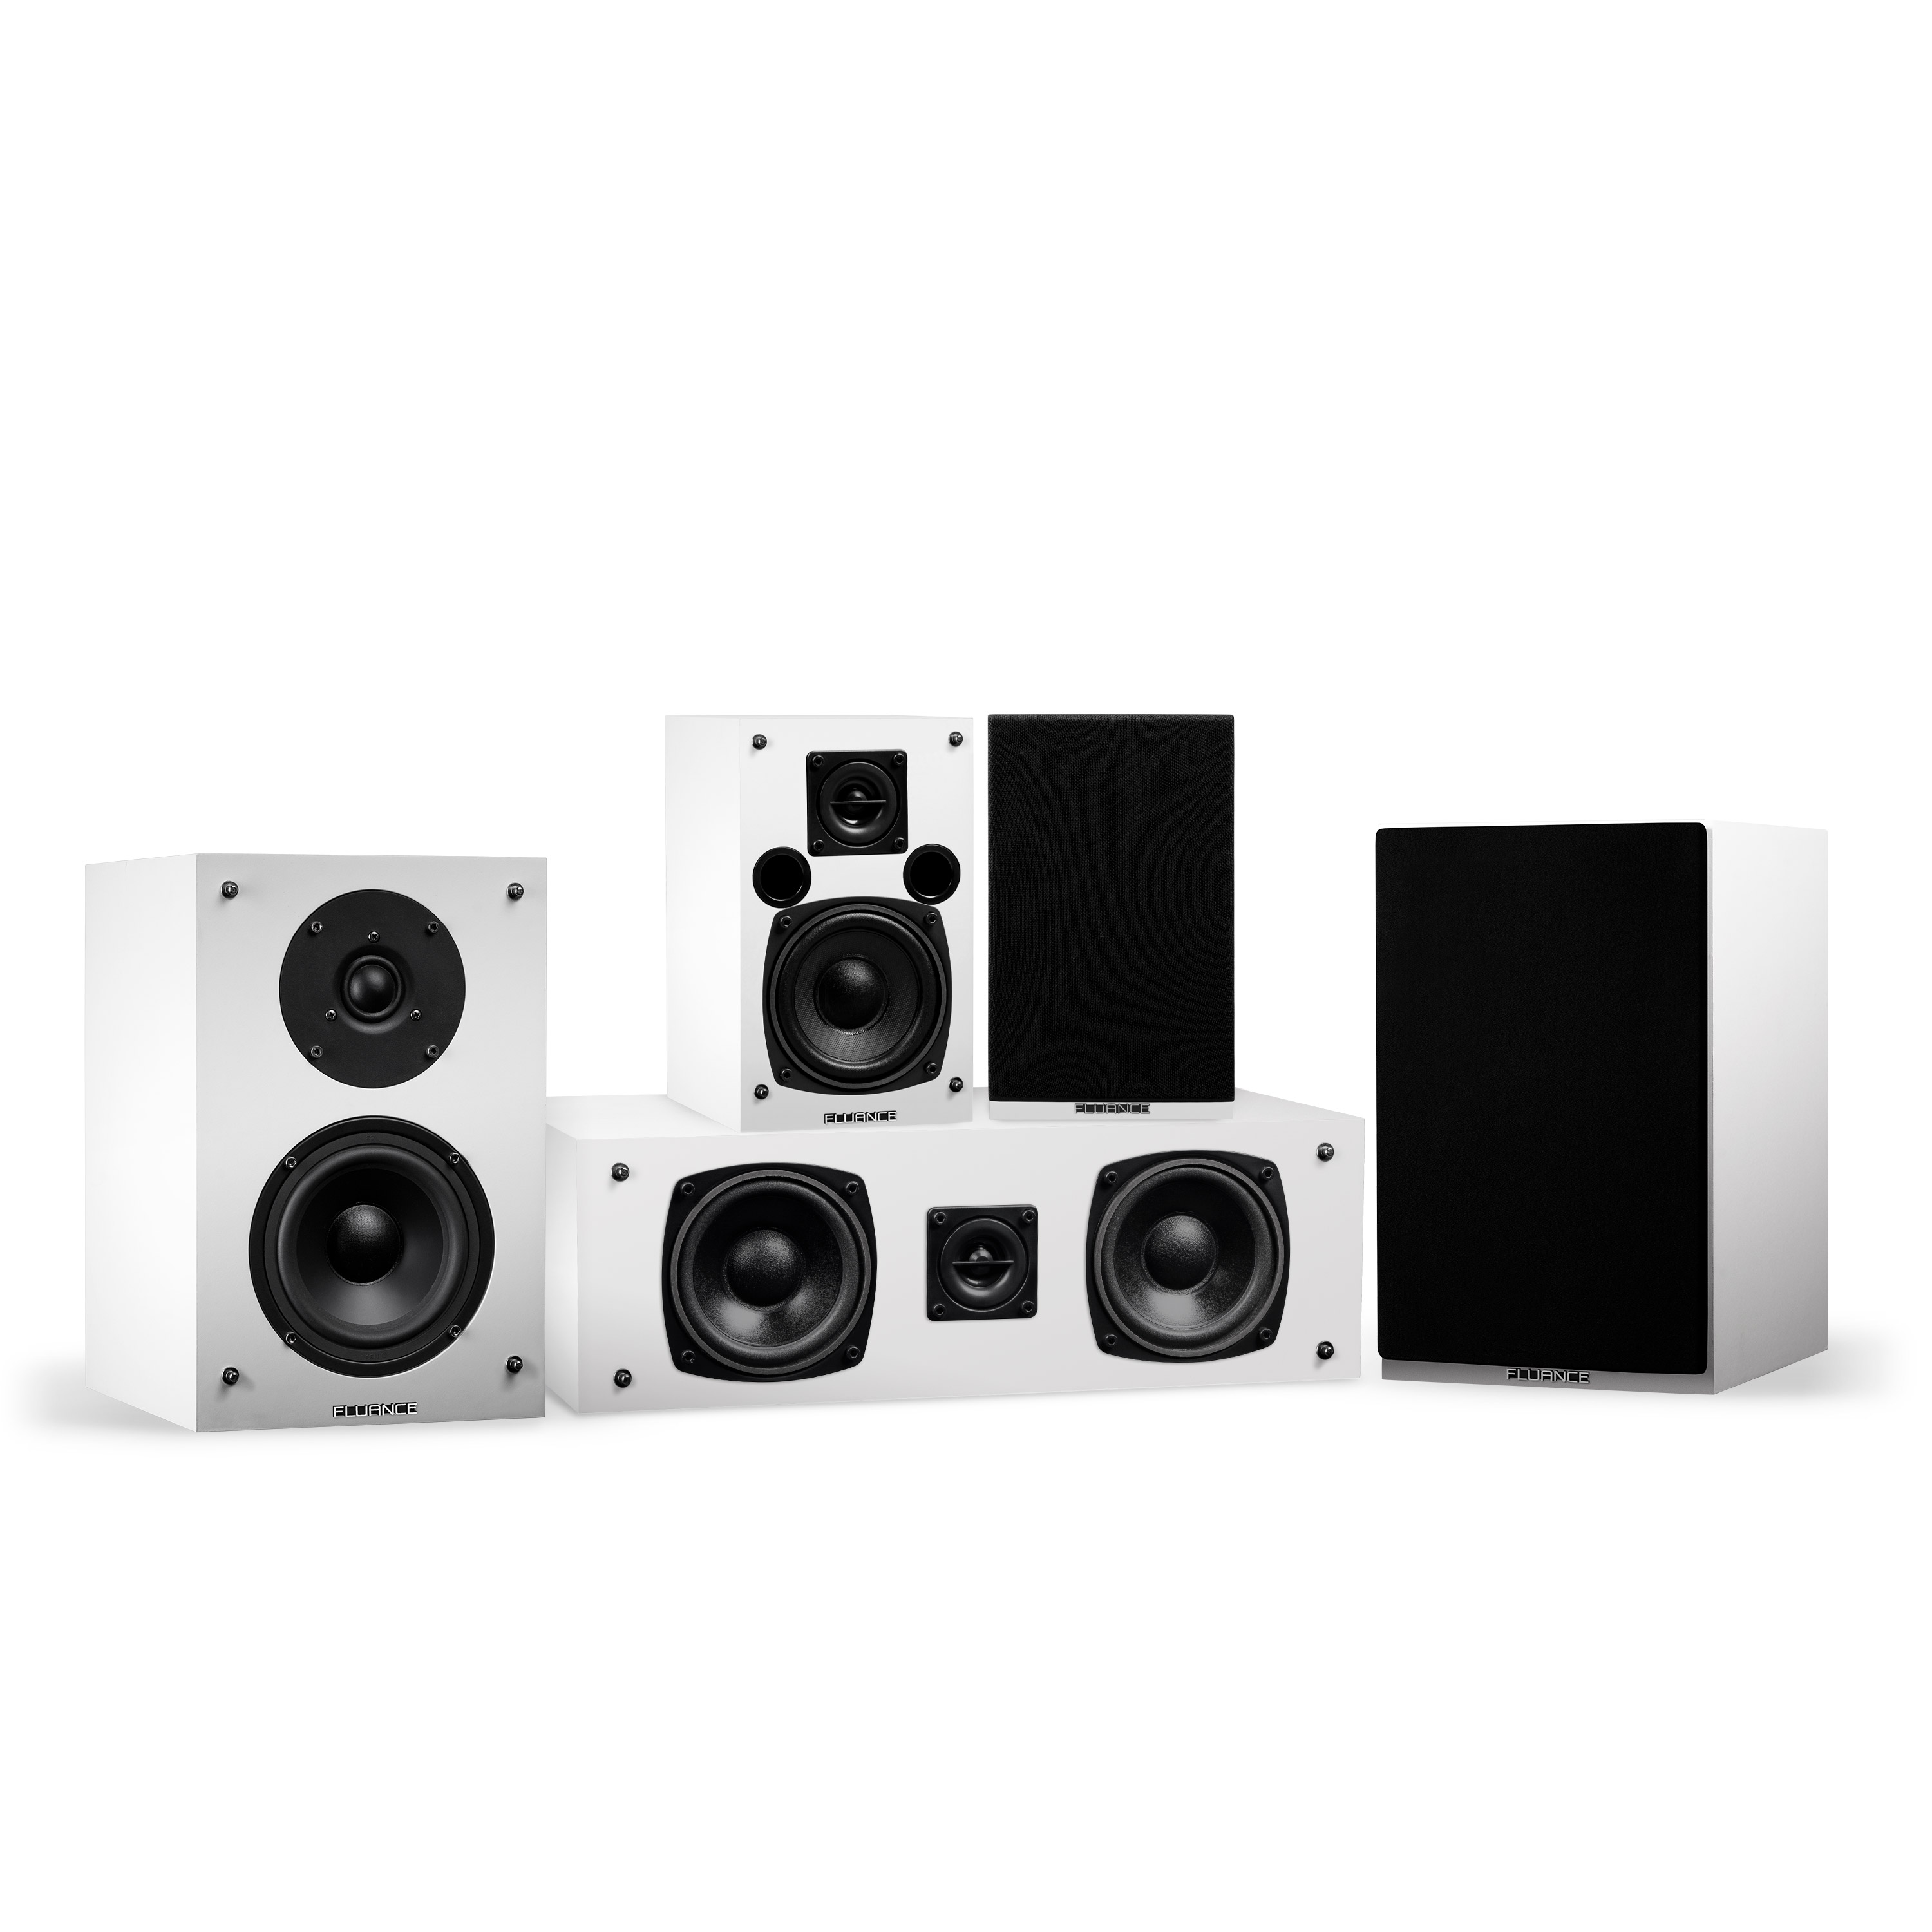 Fluance Elite Compact Home Theater 5.0 Speaker System - White - image 1 of 7